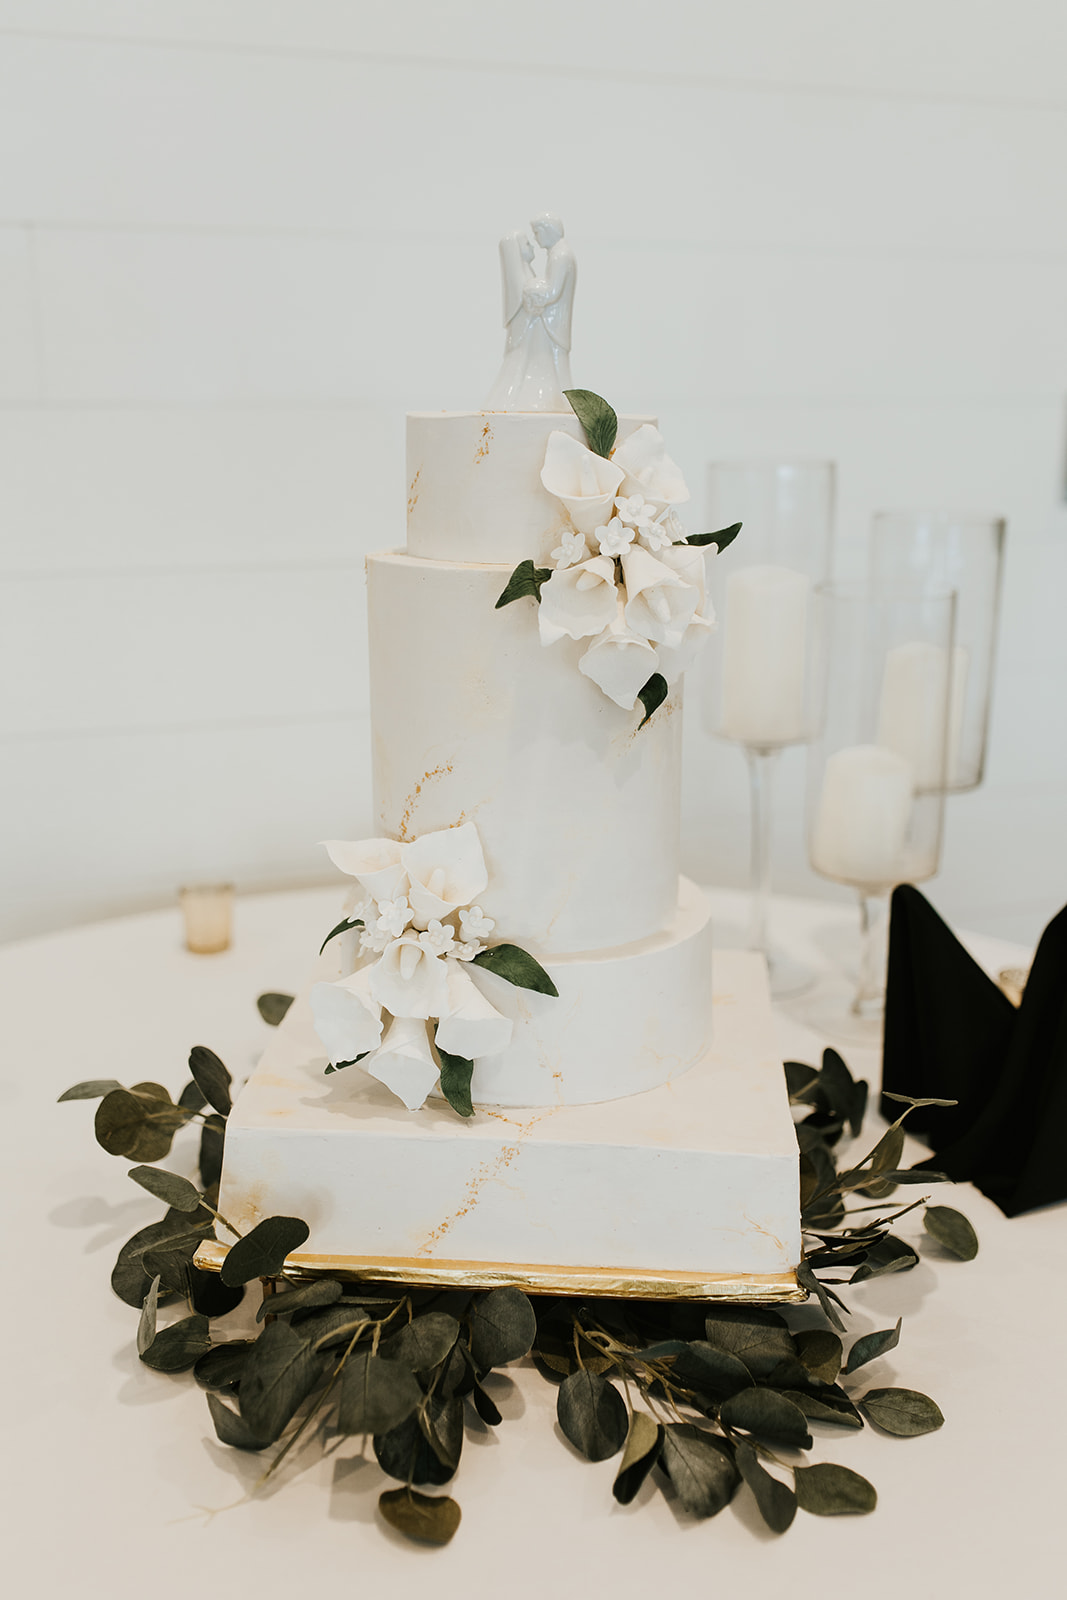 A beautiful 4-tier custom wedding cake with gold leaf and live flowers from Village Patisserie in Toledo, Ohio